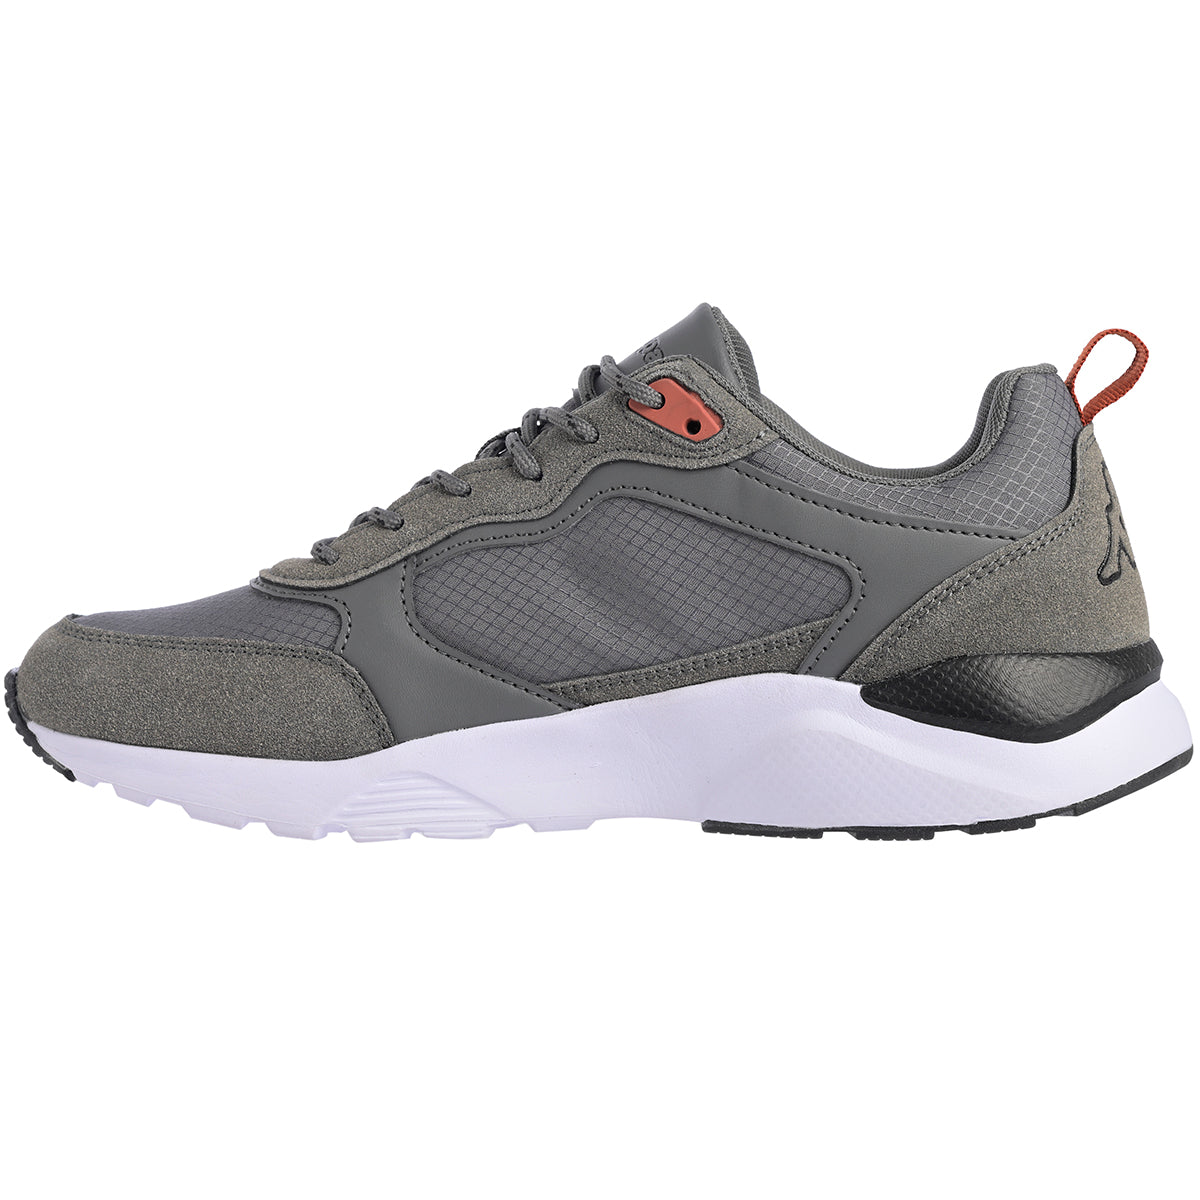 Sneakers Brady NY gris homme - Image 2